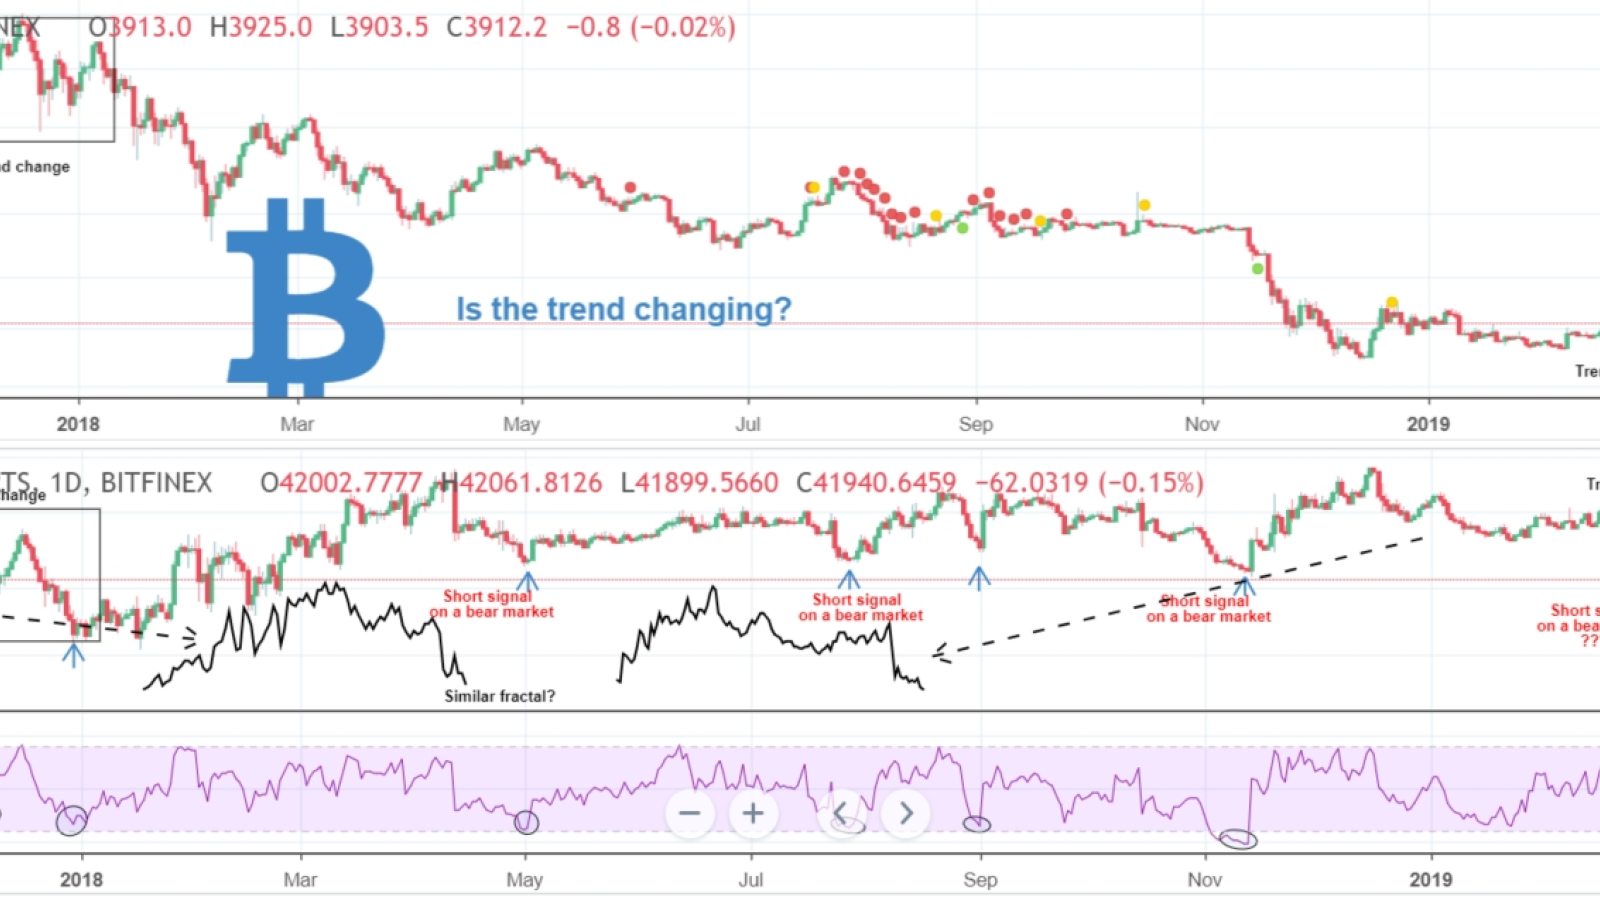 We are on the verge of a long-term BTC trend